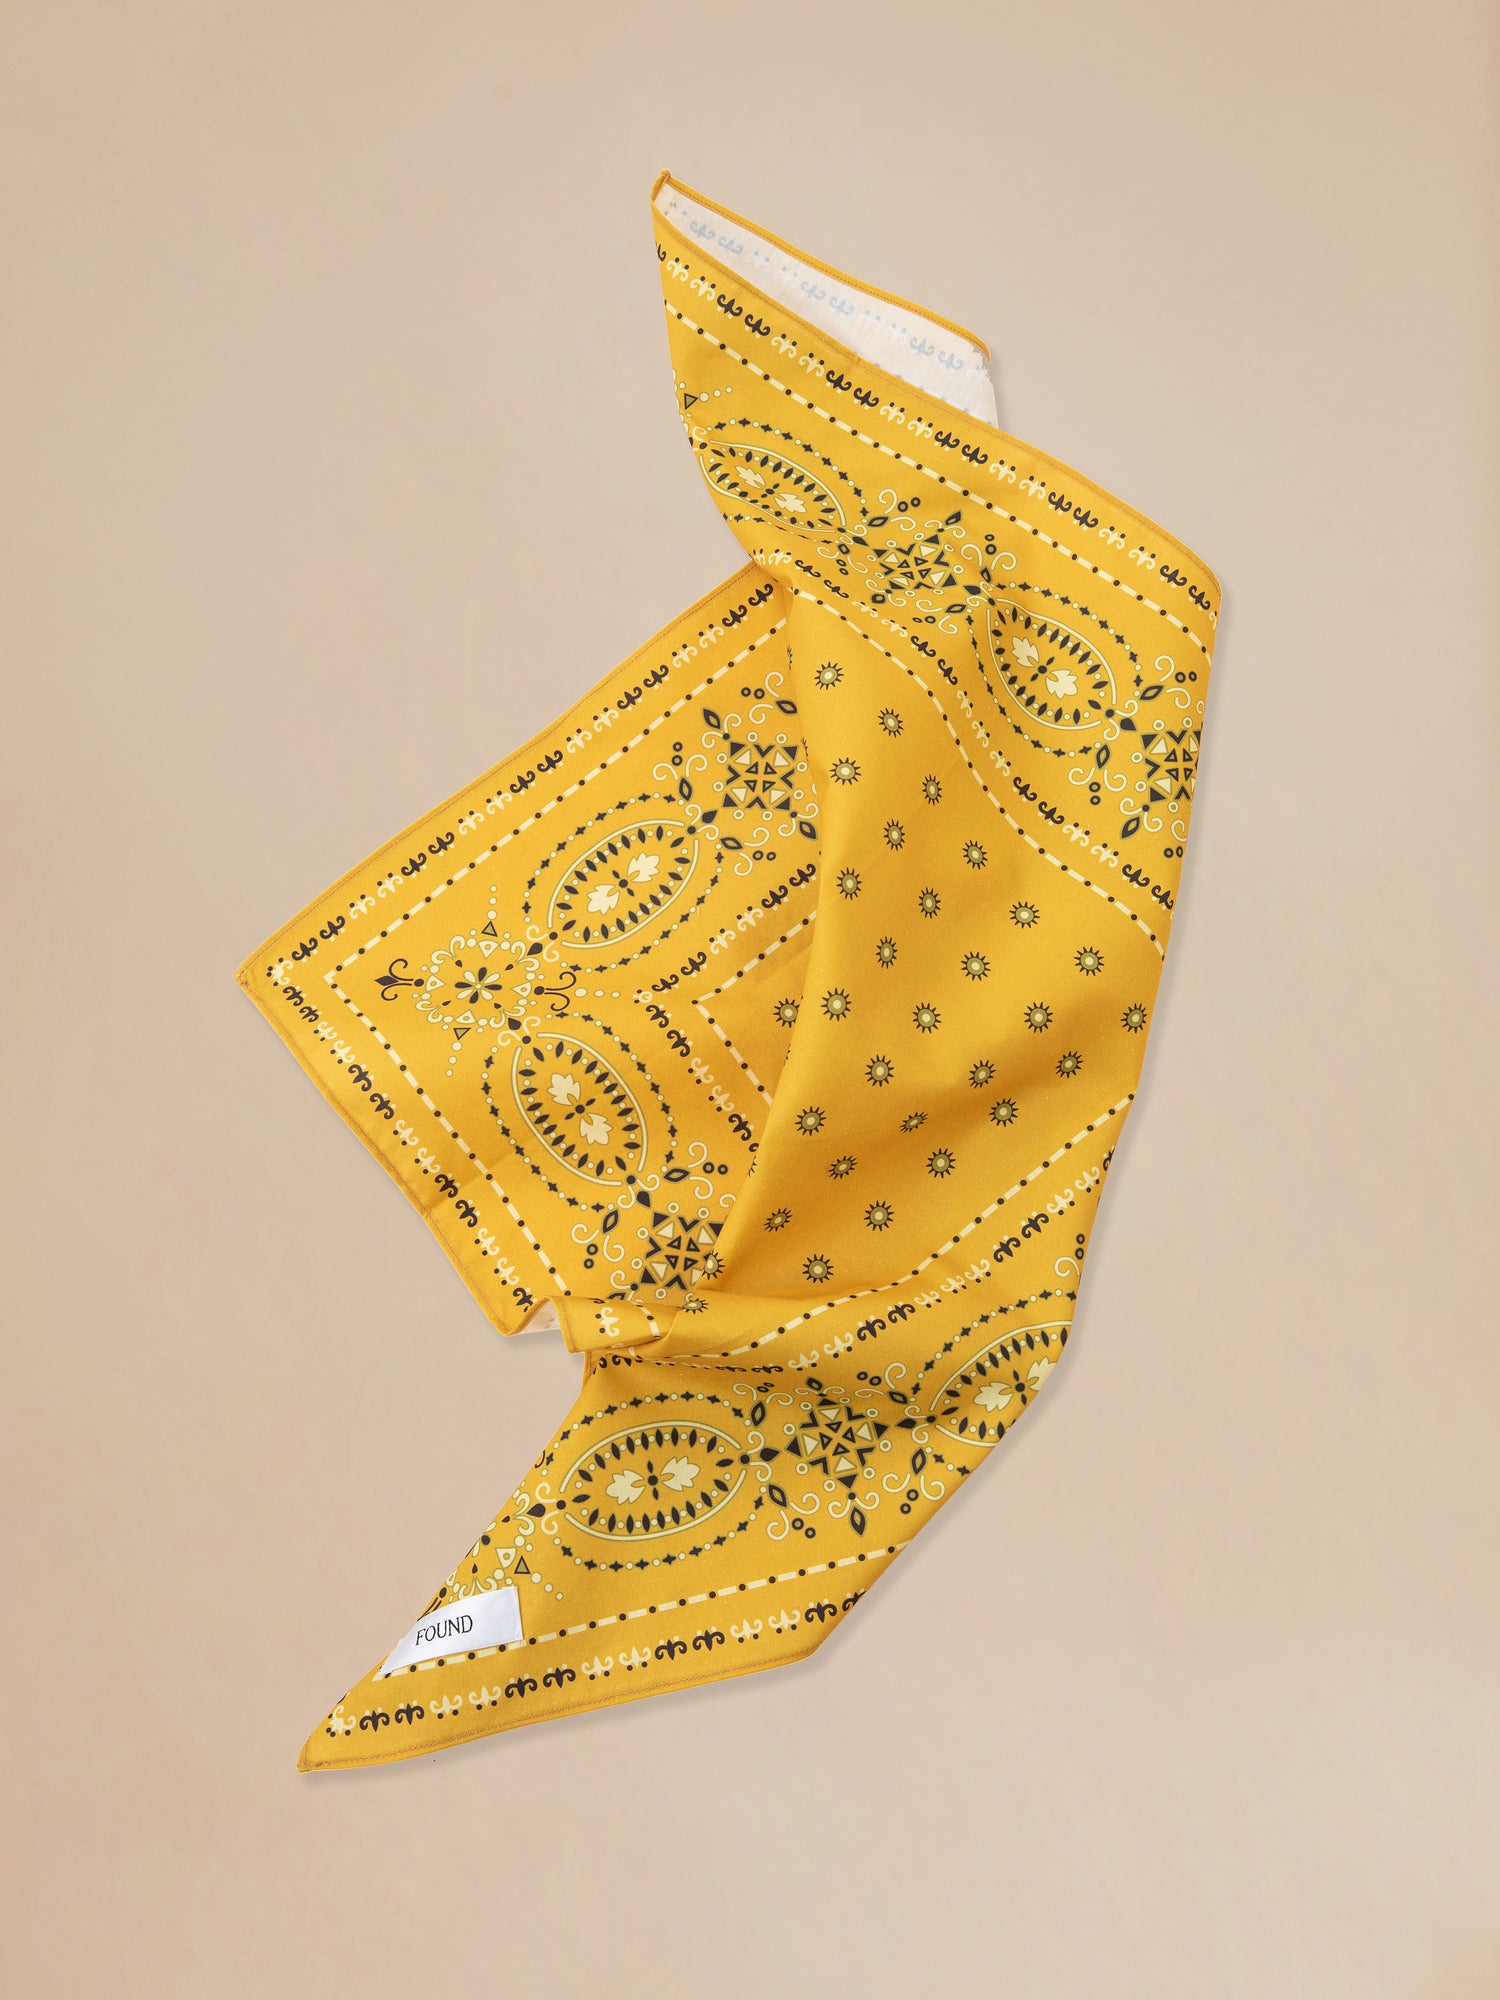 A Yellow Western bandana from Found on a beige background.